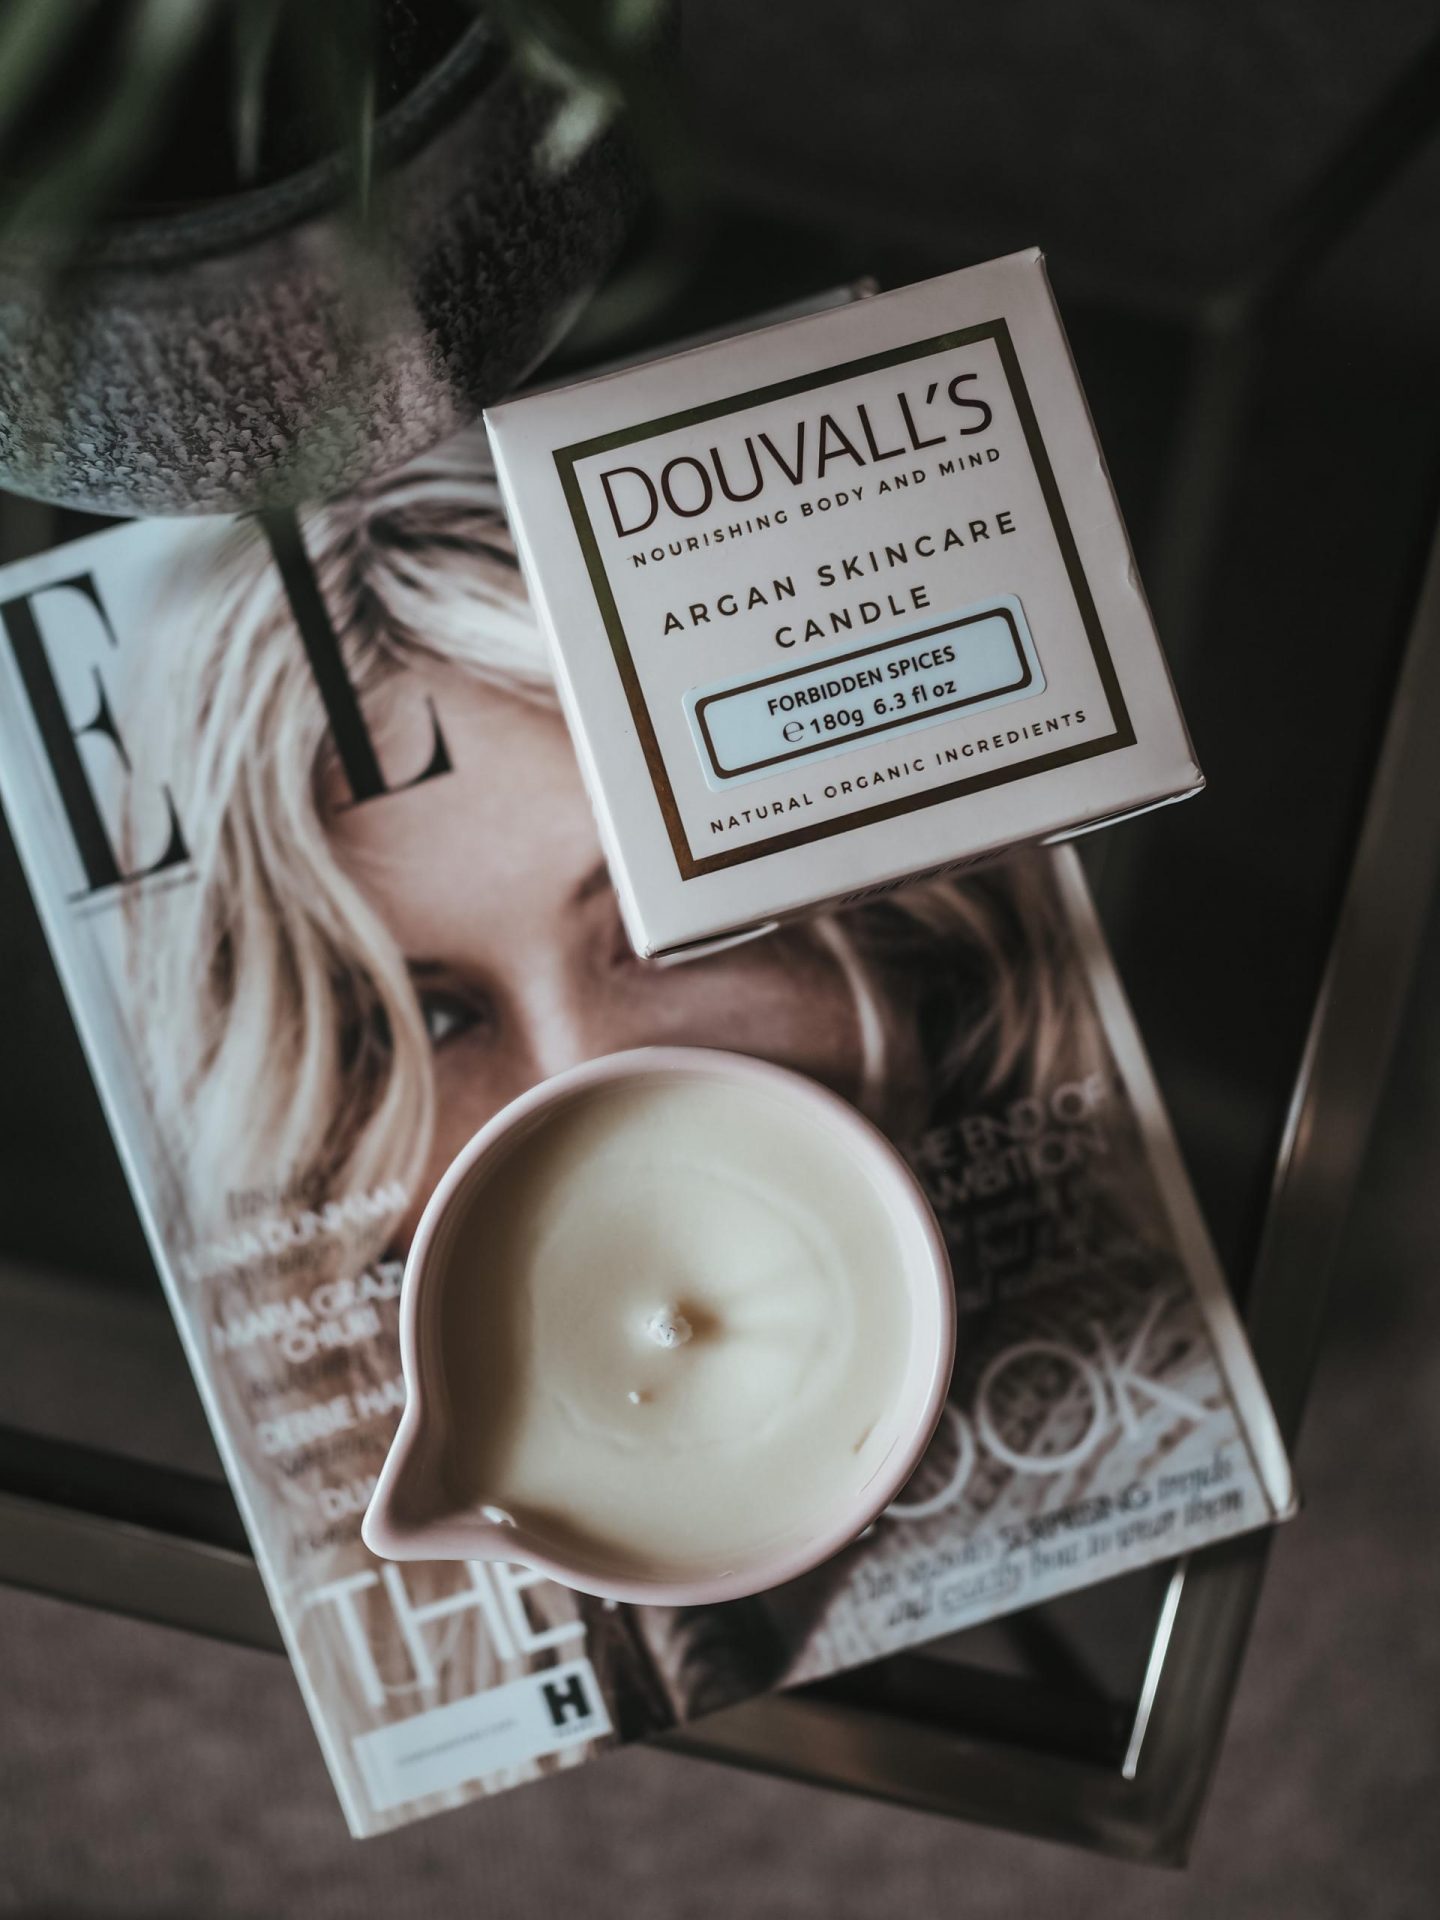 Douvall’s Argan Skincare Candle